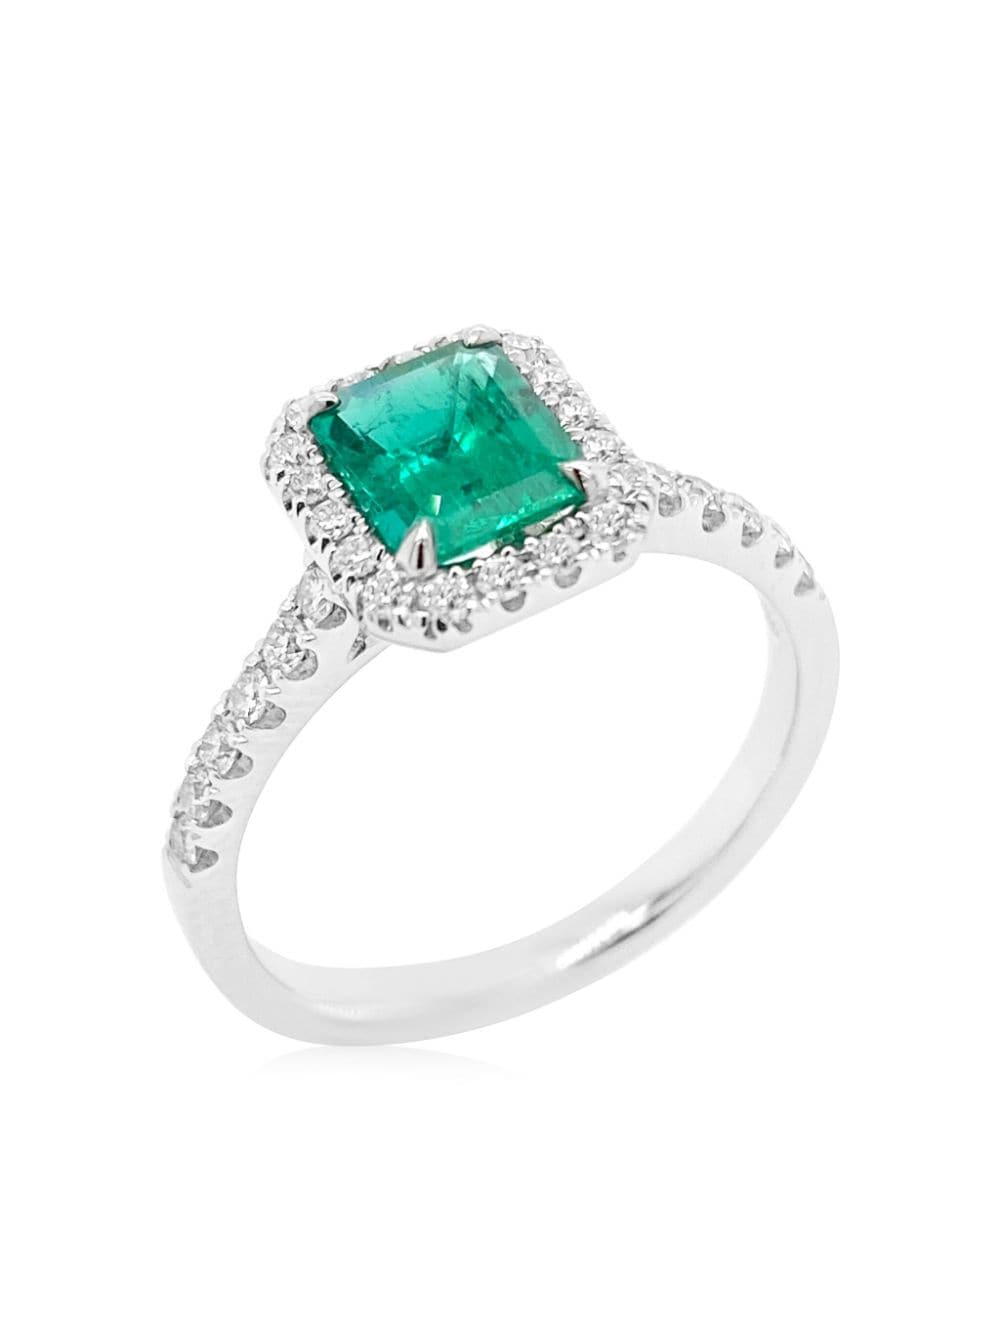 HYT Jewelry platinum diamond and Colombian emerald ring - Silver von HYT Jewelry